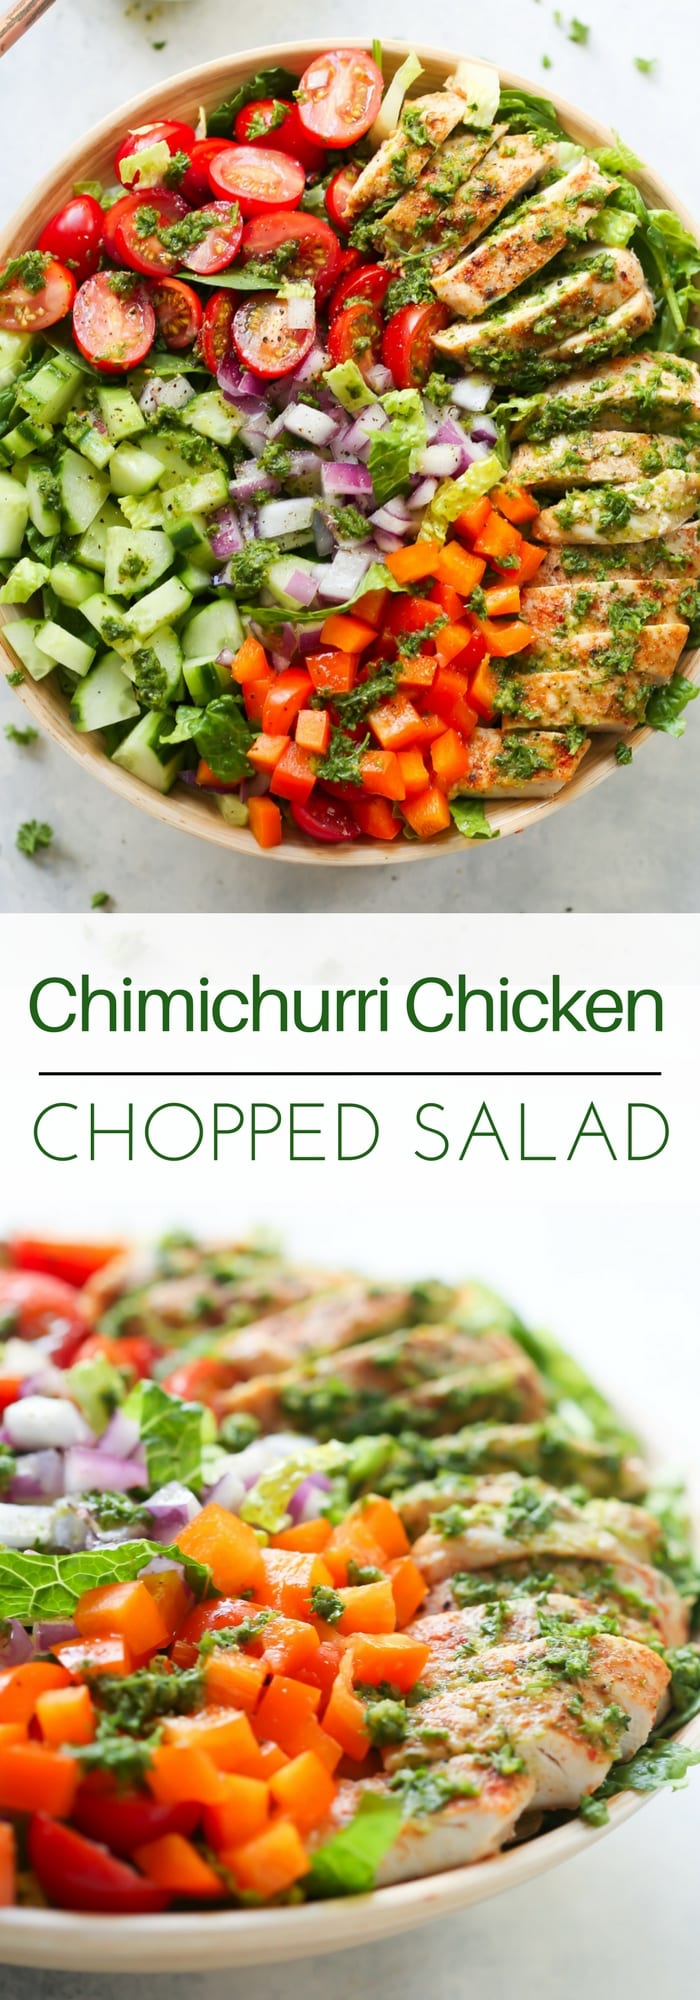 This fresh Chimichurri Chicken Chopped Salad is loaded with lettuces, cherry tomatoes, cucumber, bell pepper, red onions and grilled chicken. It's a complete meal to enjoy this summer!